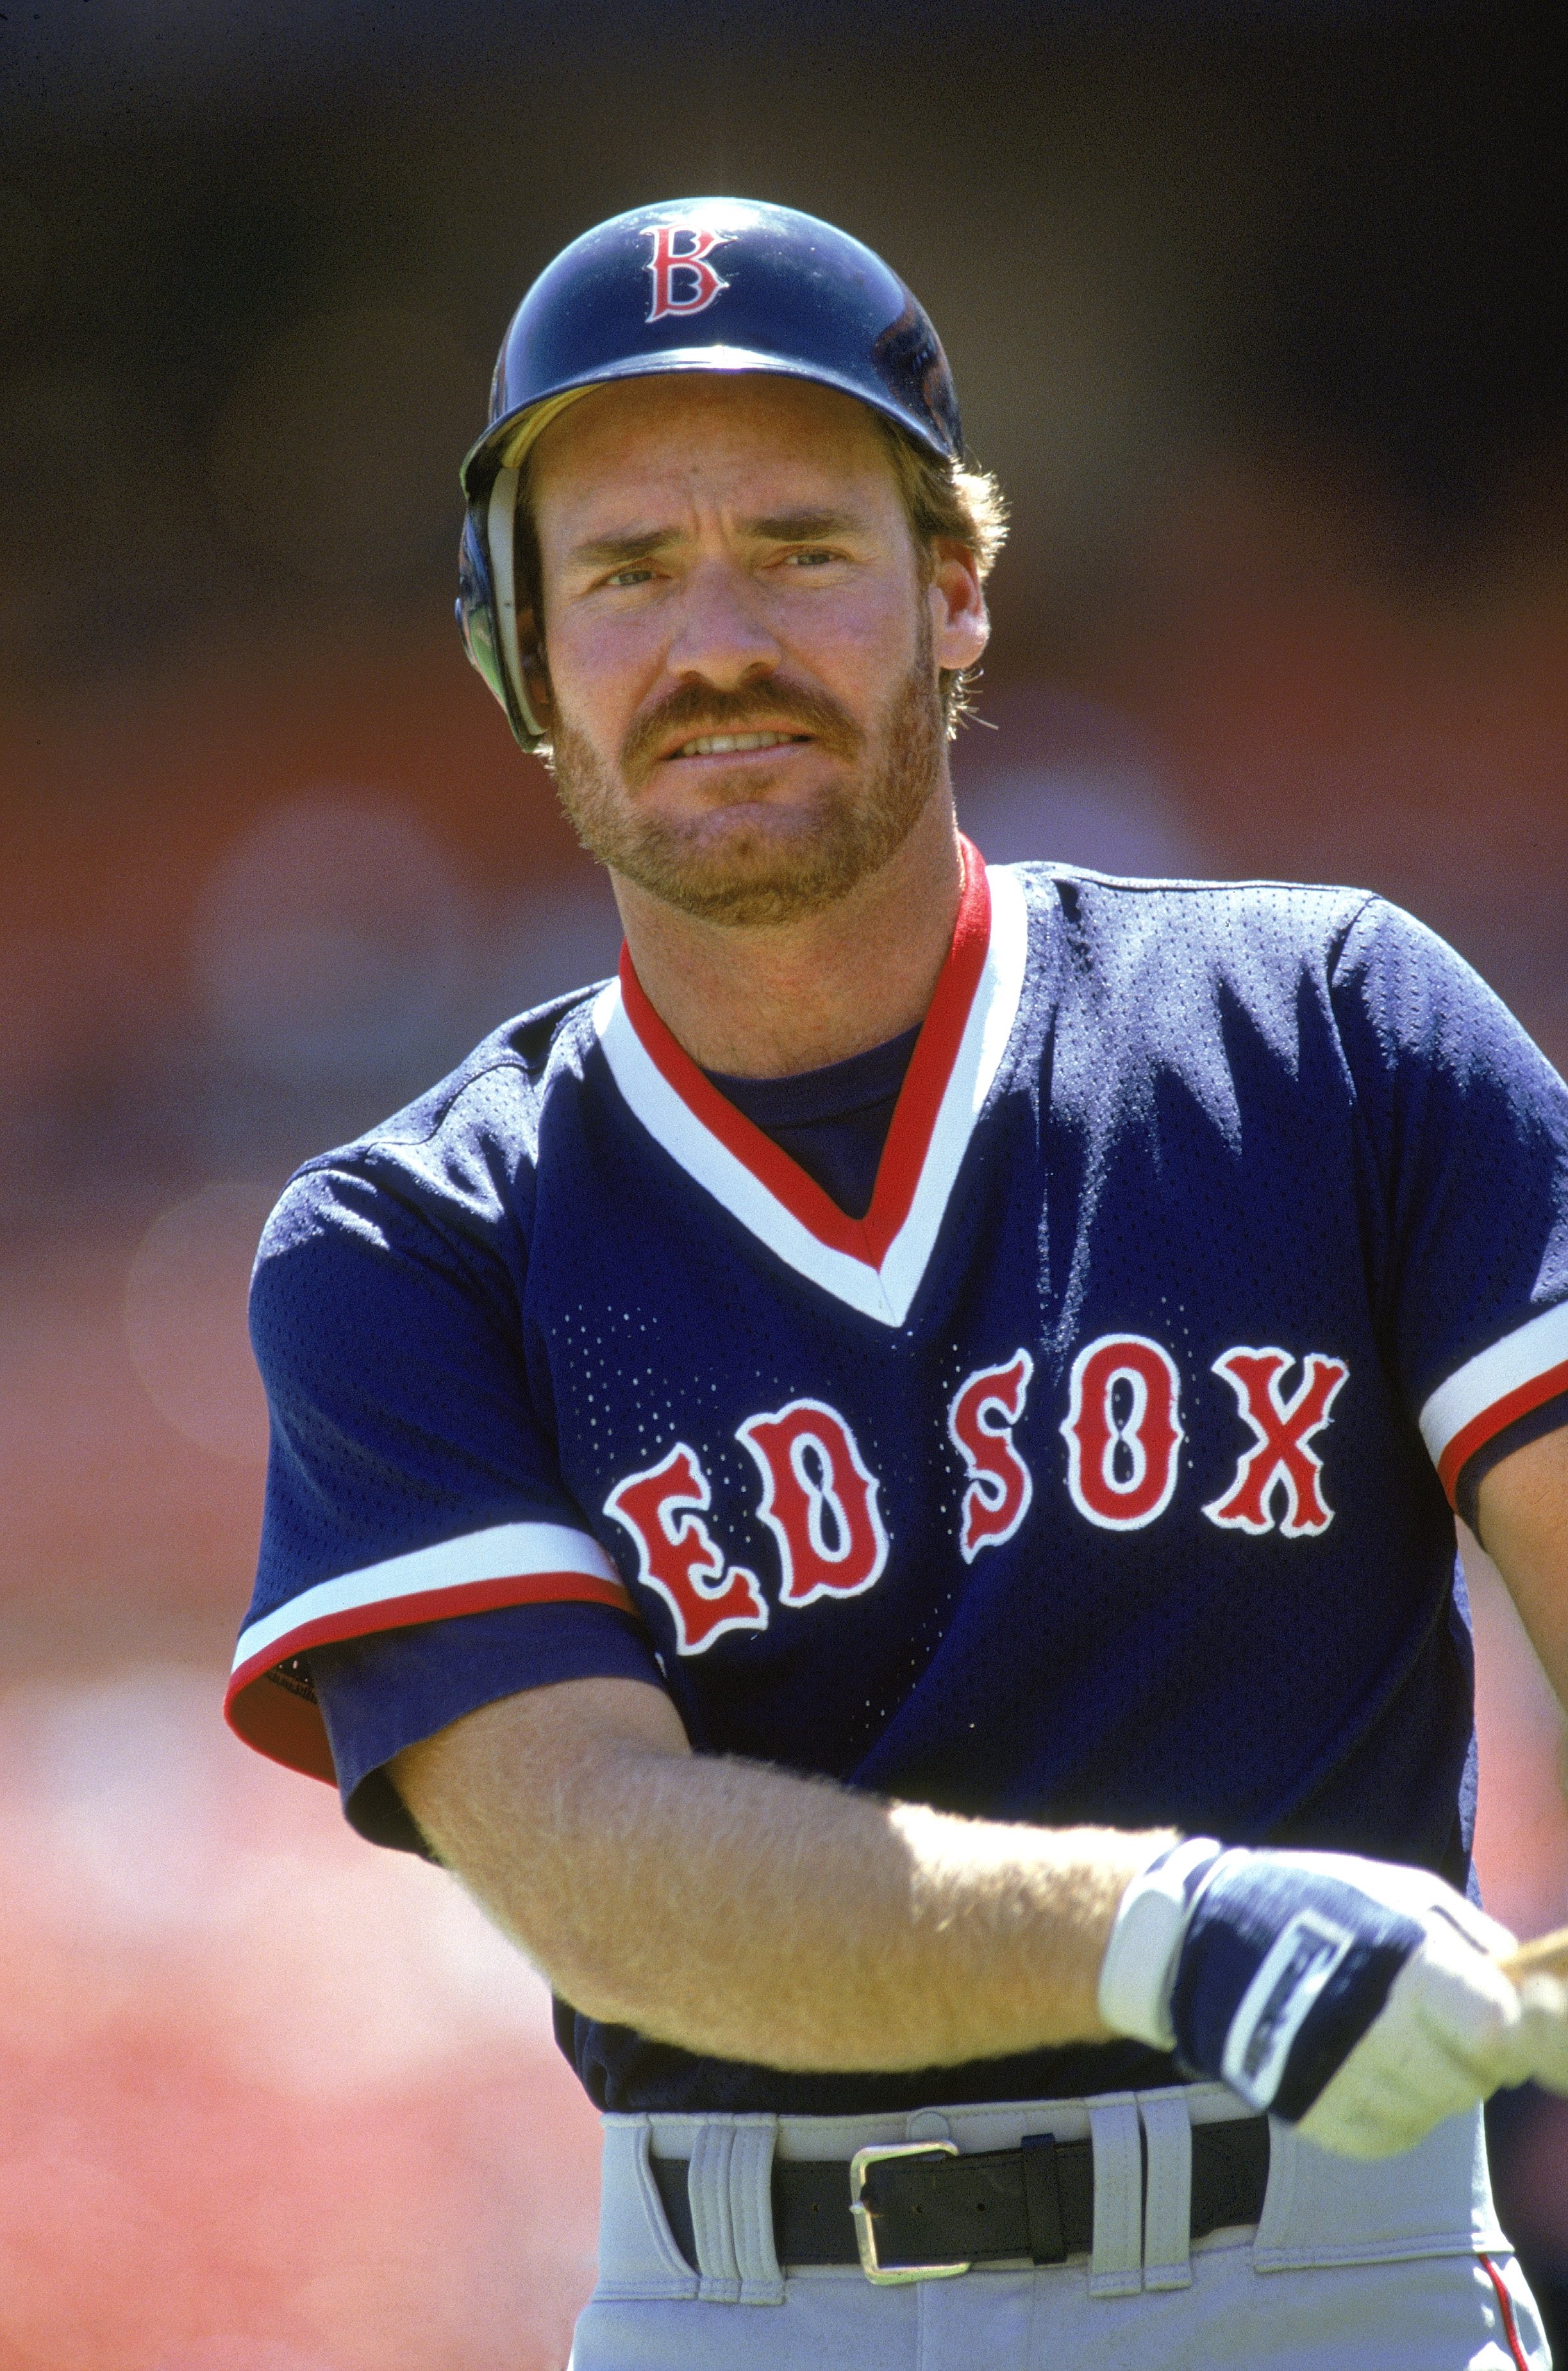 1990:  Wade Boggs #26 of the Boston Red Sox looks on during a game in the 1990 MLB season.  (Photo by Otto Greule Jr/Gettyimages)